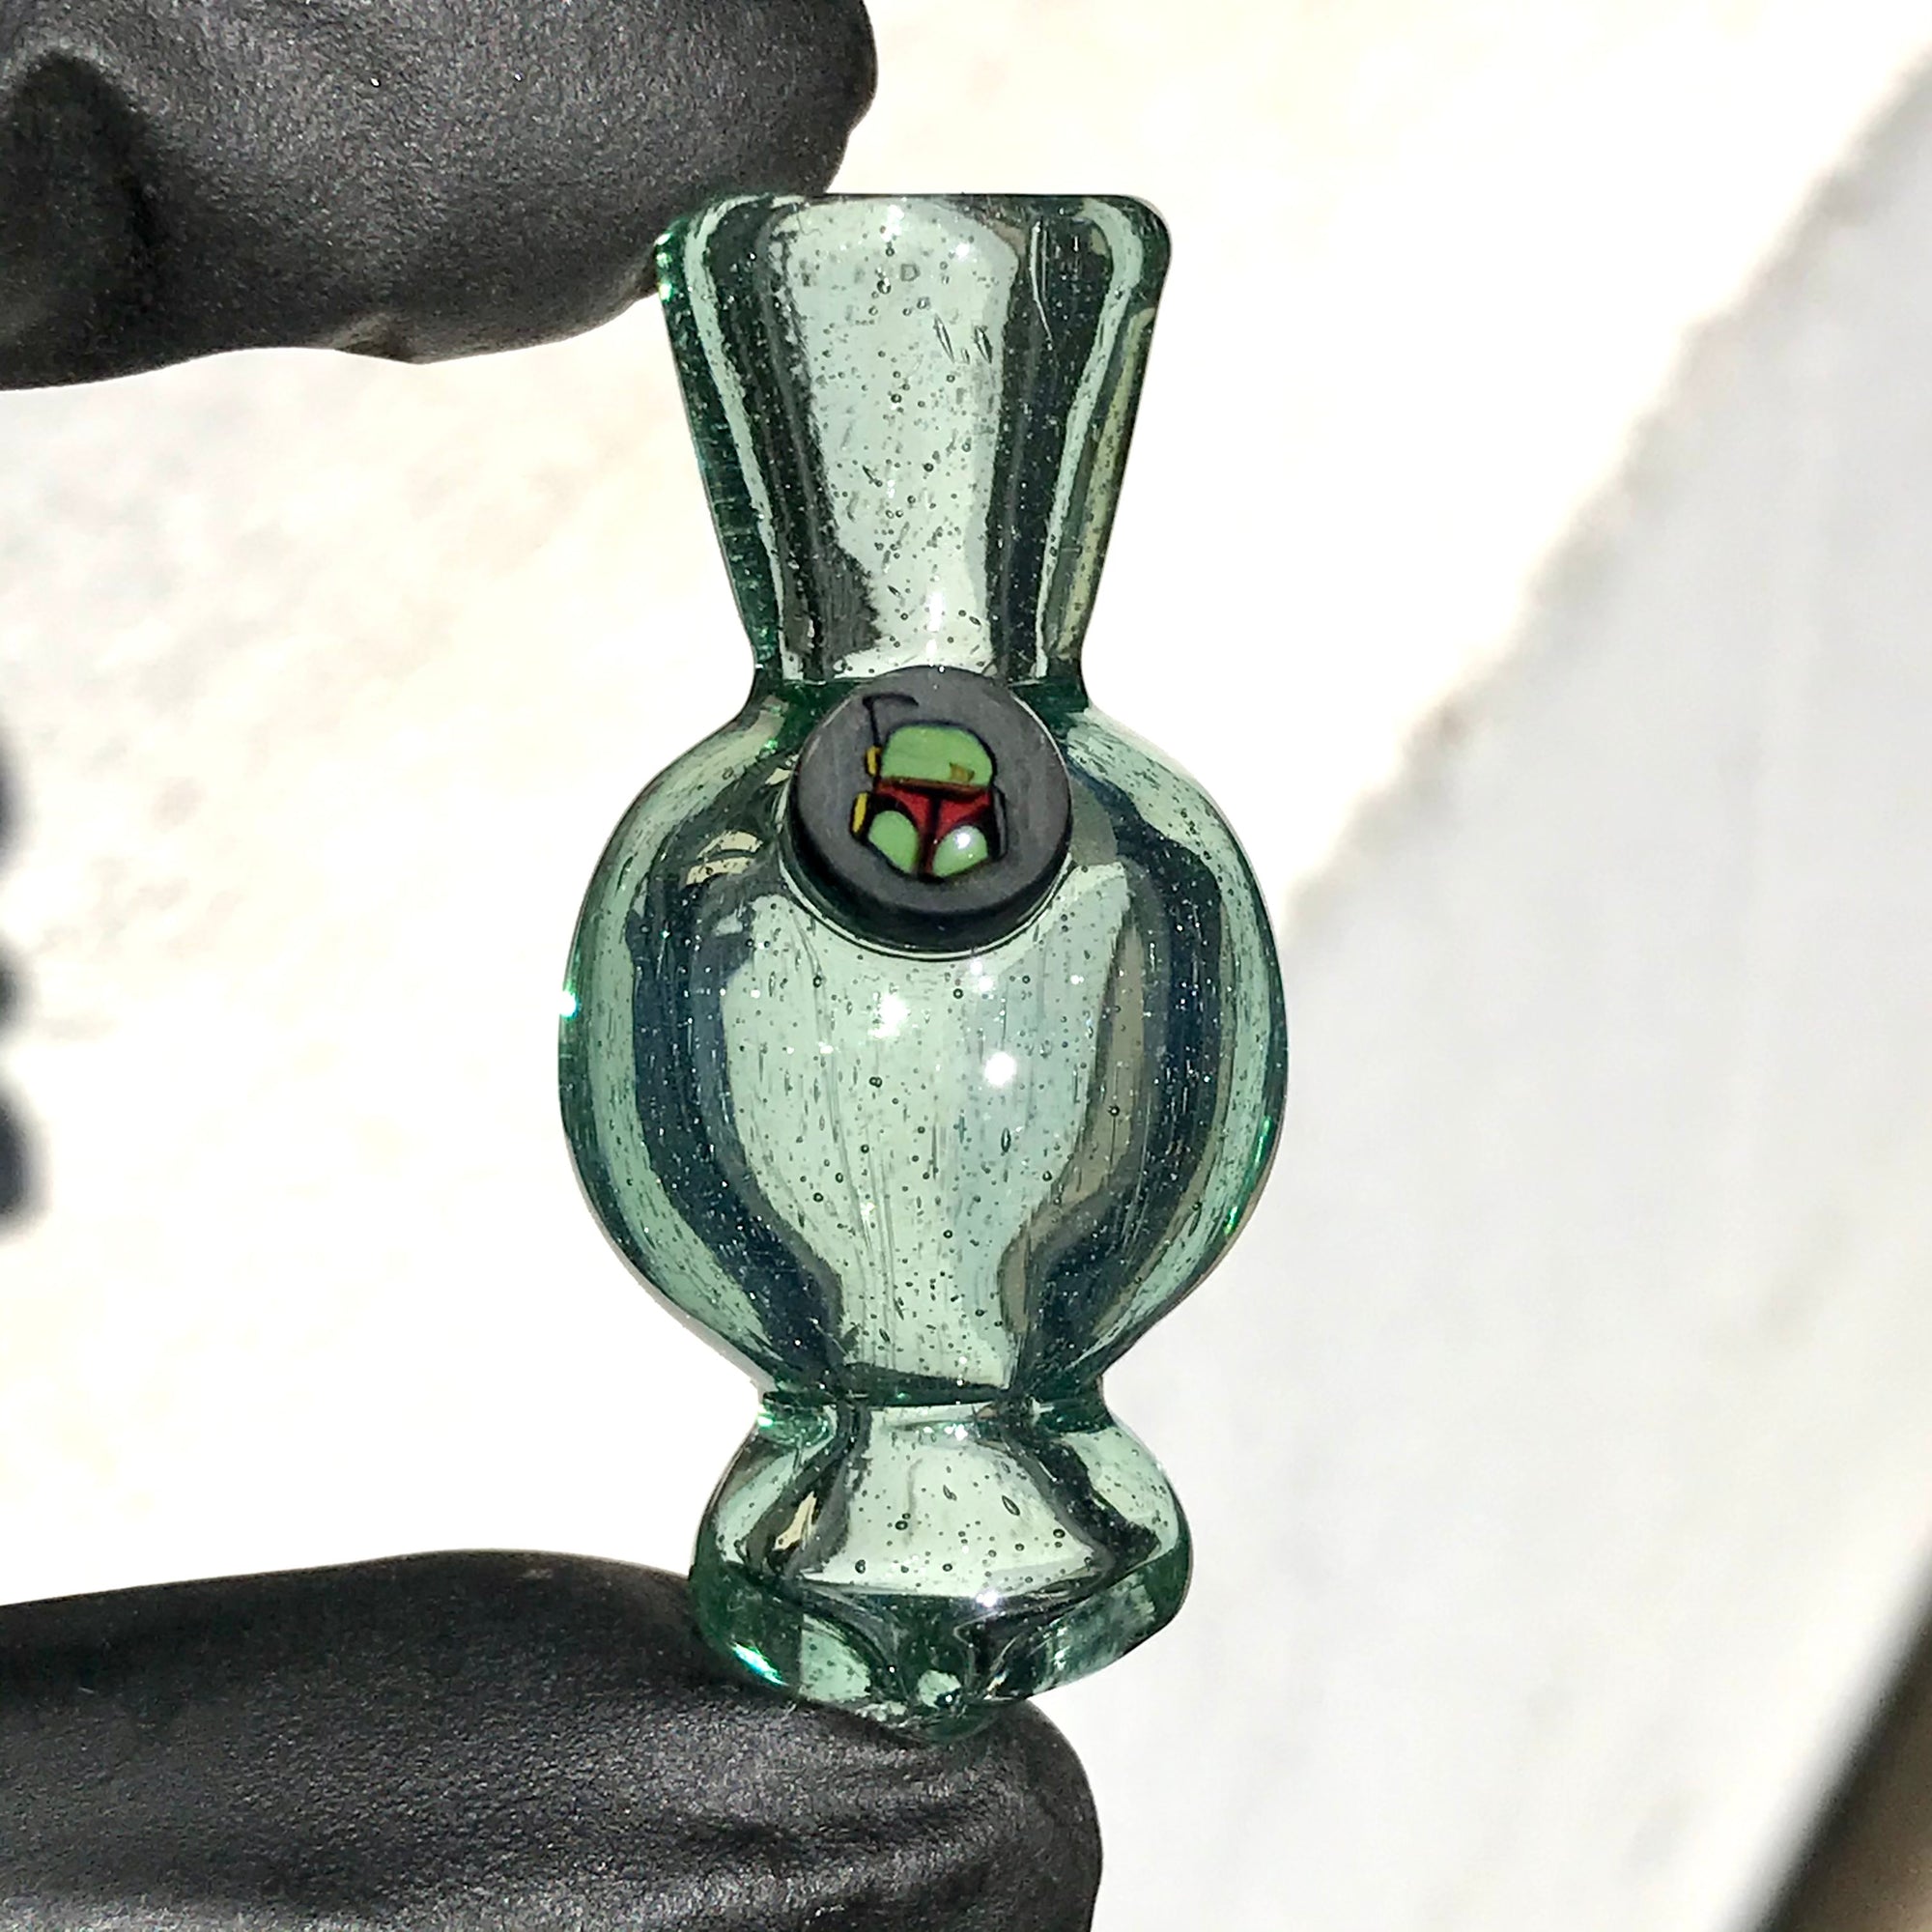 Hoyer Glass Spinner Cap with Milli Image and Matching Milli Terp Pearl (Atlantis) show variant 